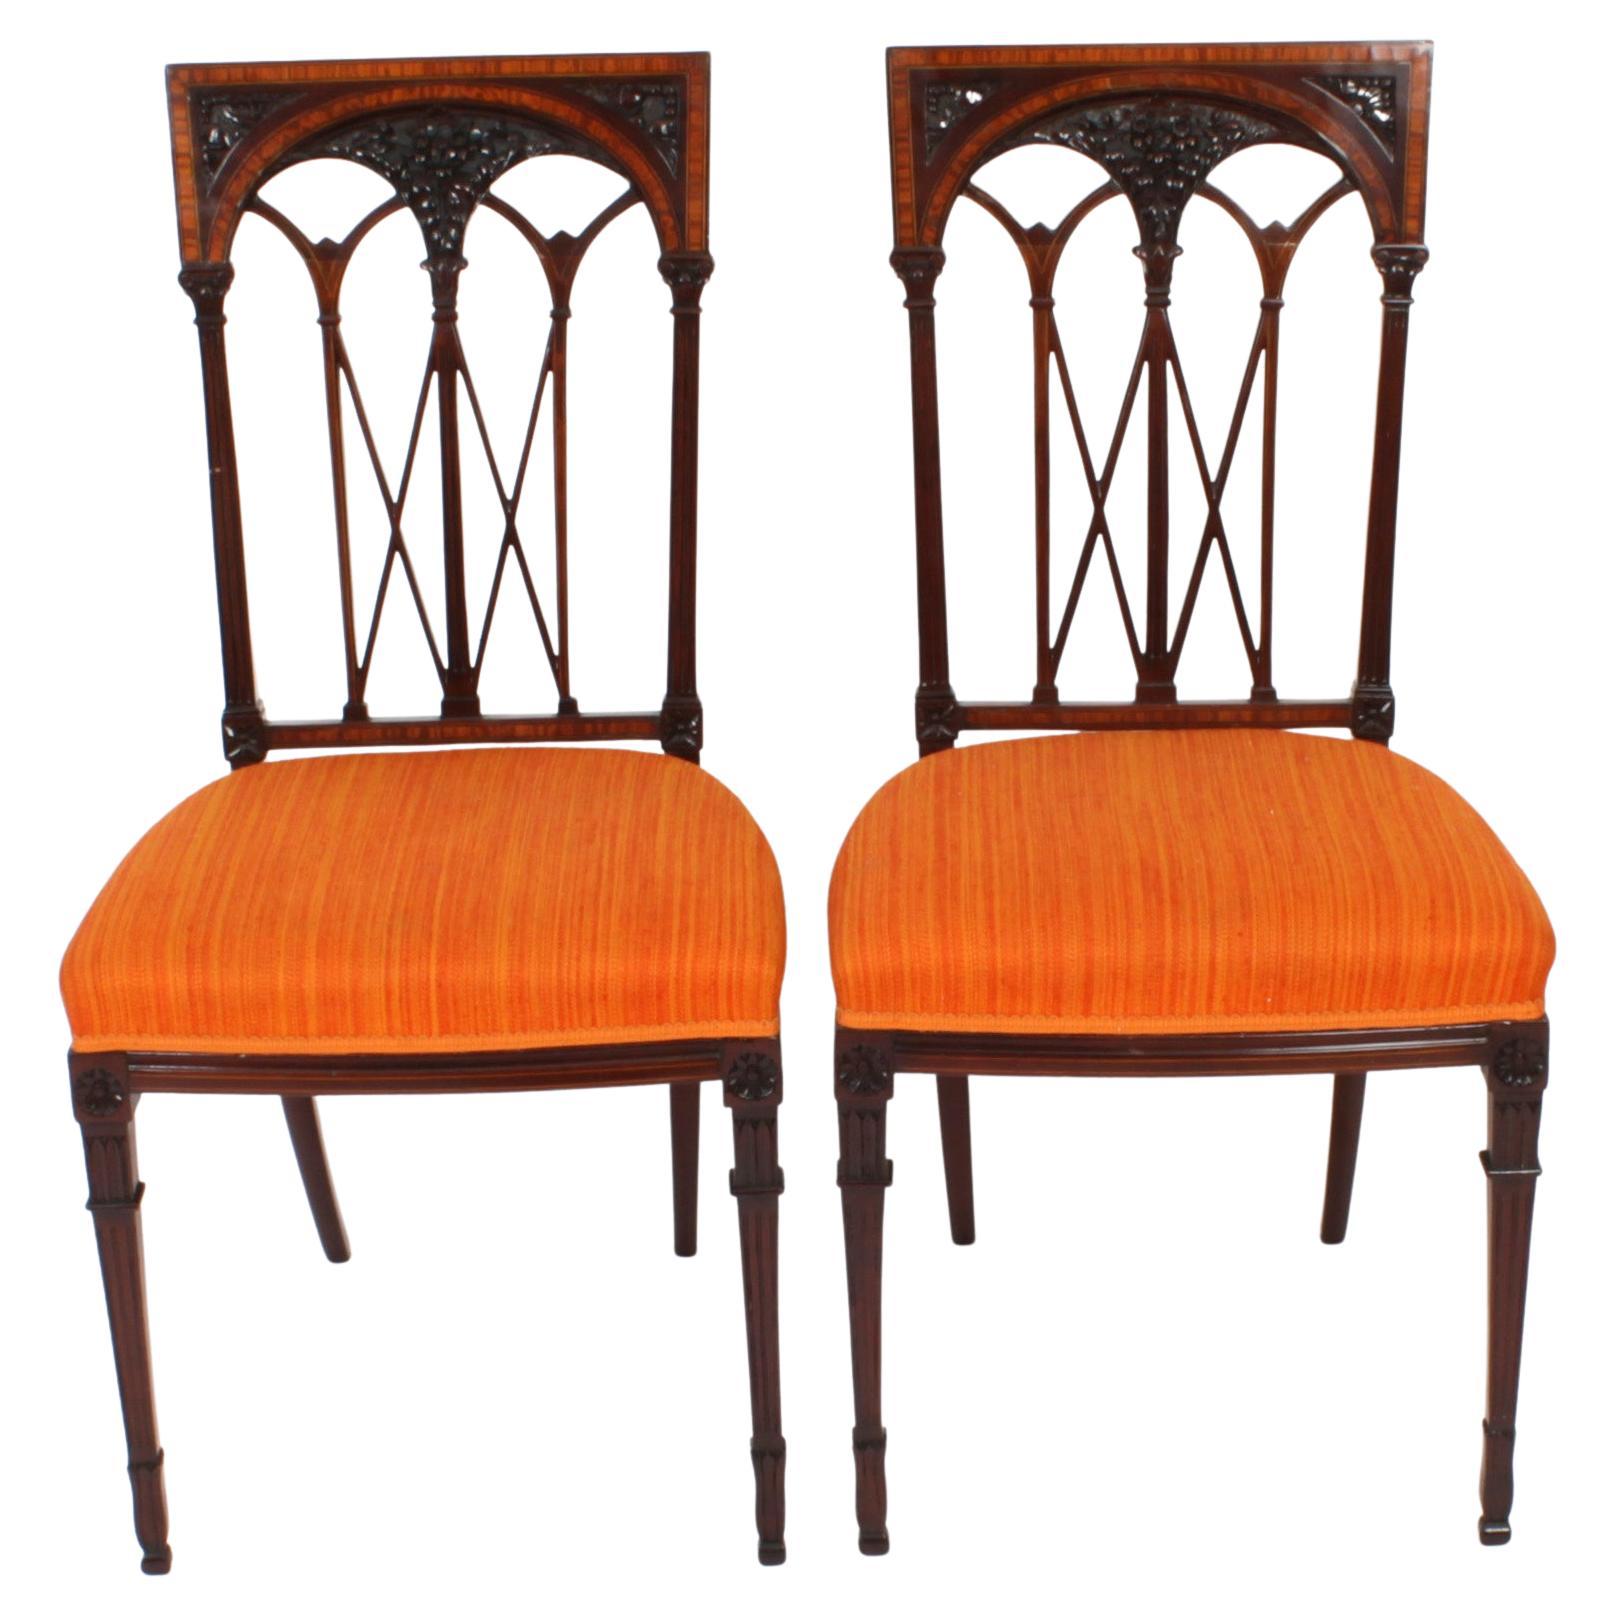 Antique Pair Sheraton Revival Side Chairs Early 20th Century For Sale